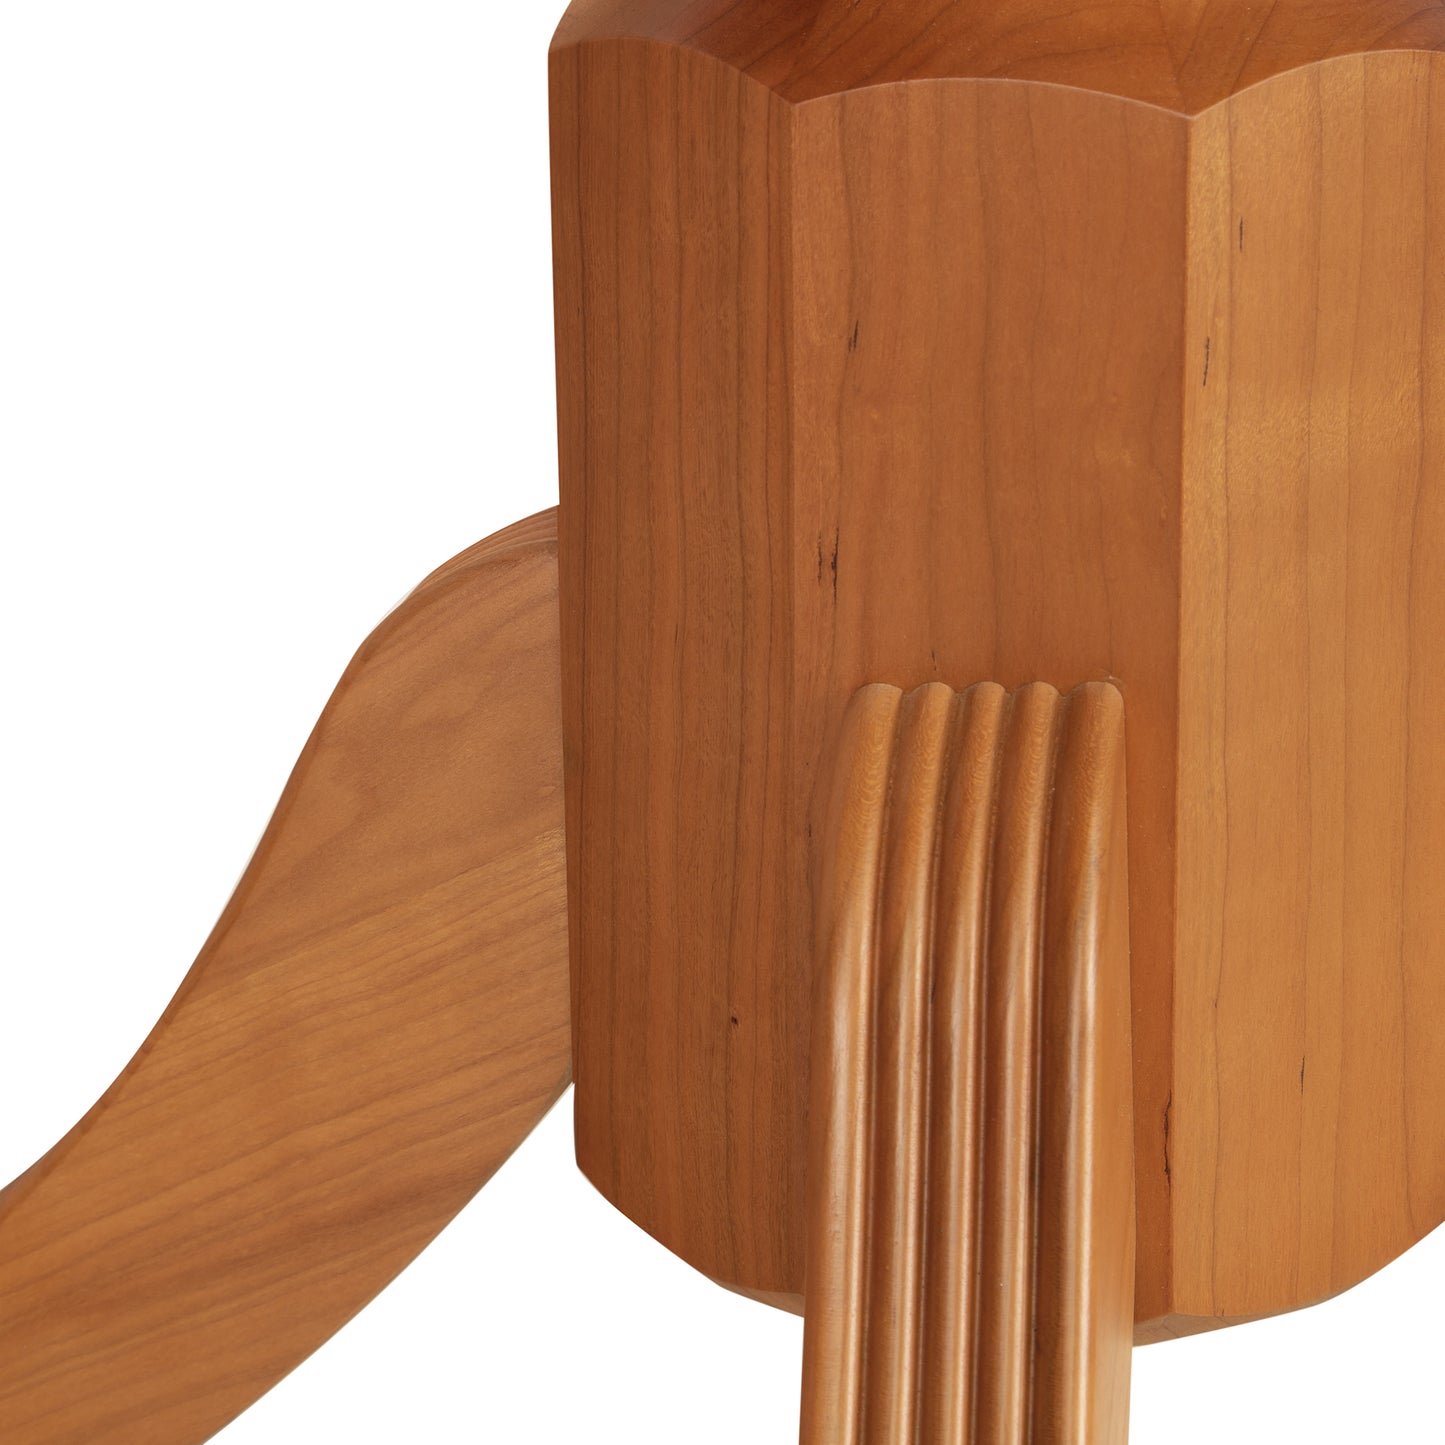 A close up of a Duncan-Phyfe Round Pedestal Dining Table made by Lyndon Furniture with legs.